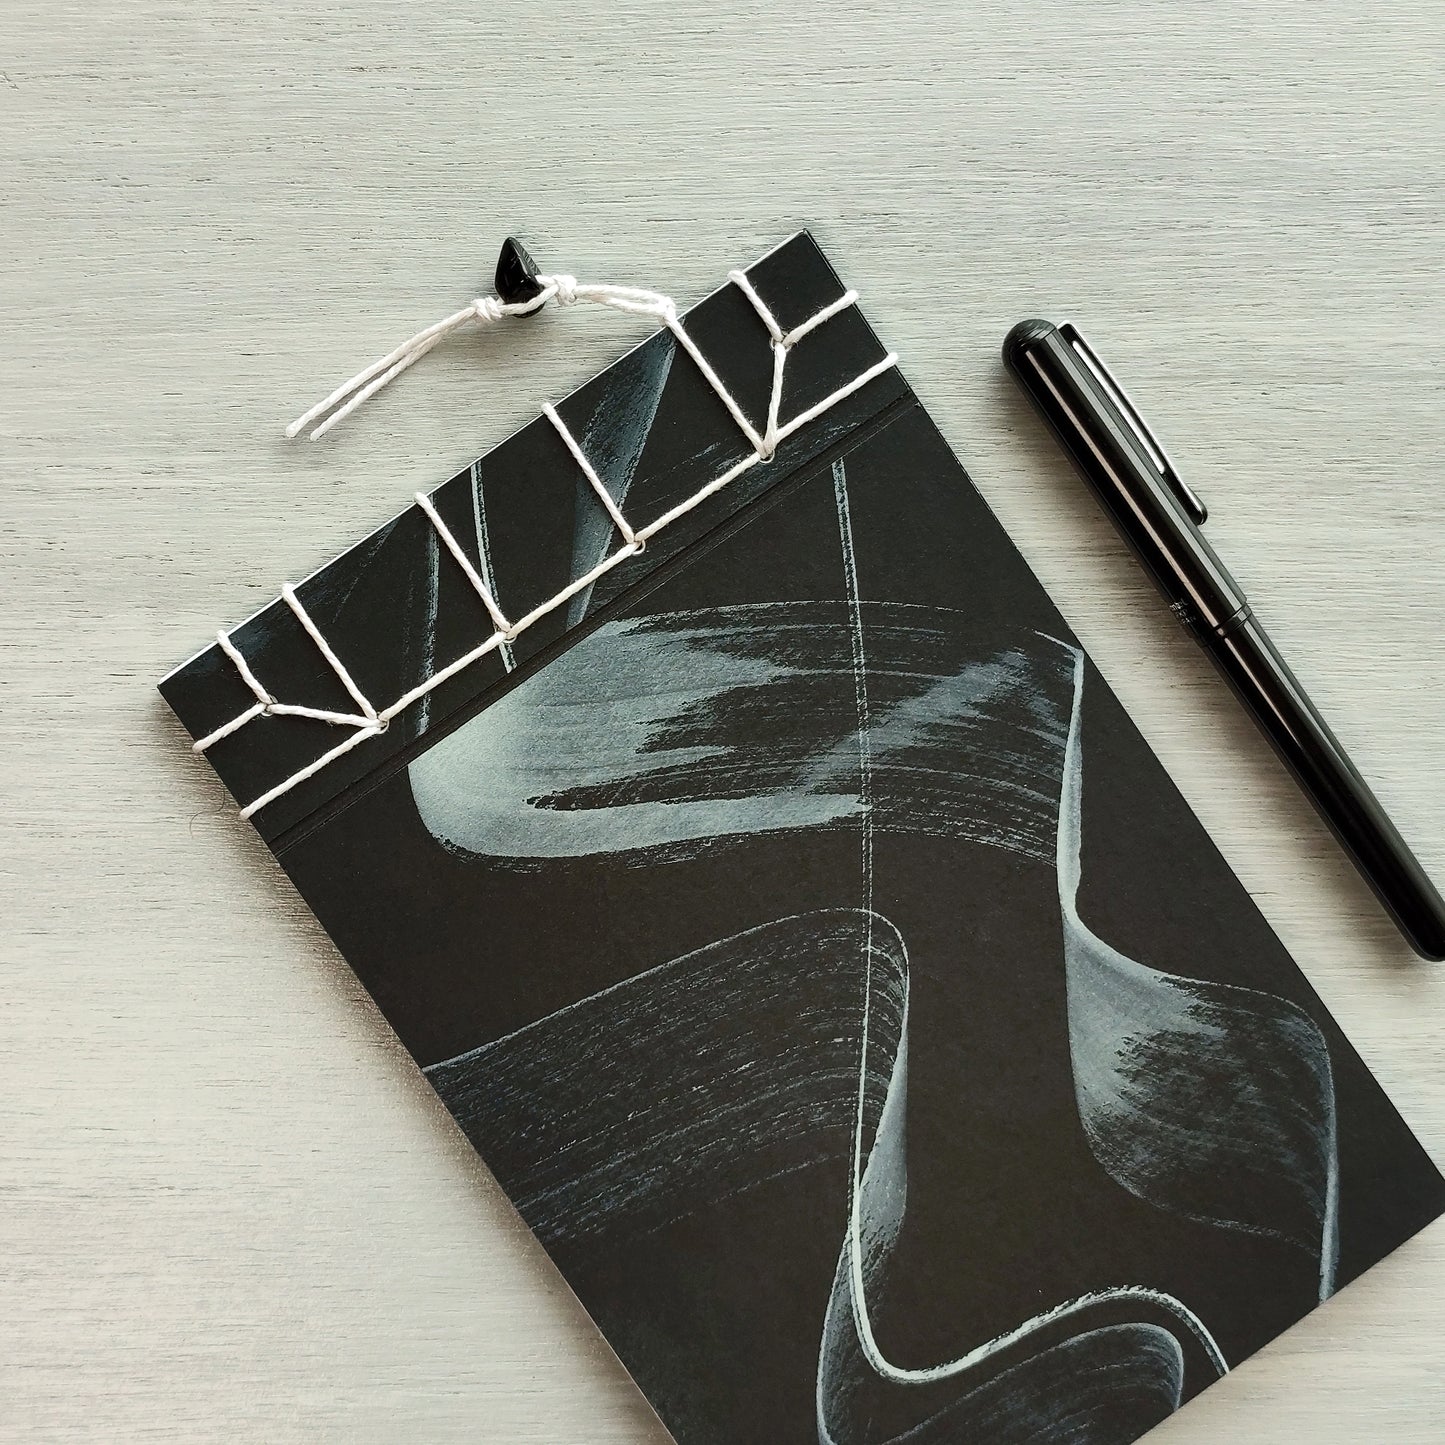 Watoji Notebook - 4 | Black and White collection